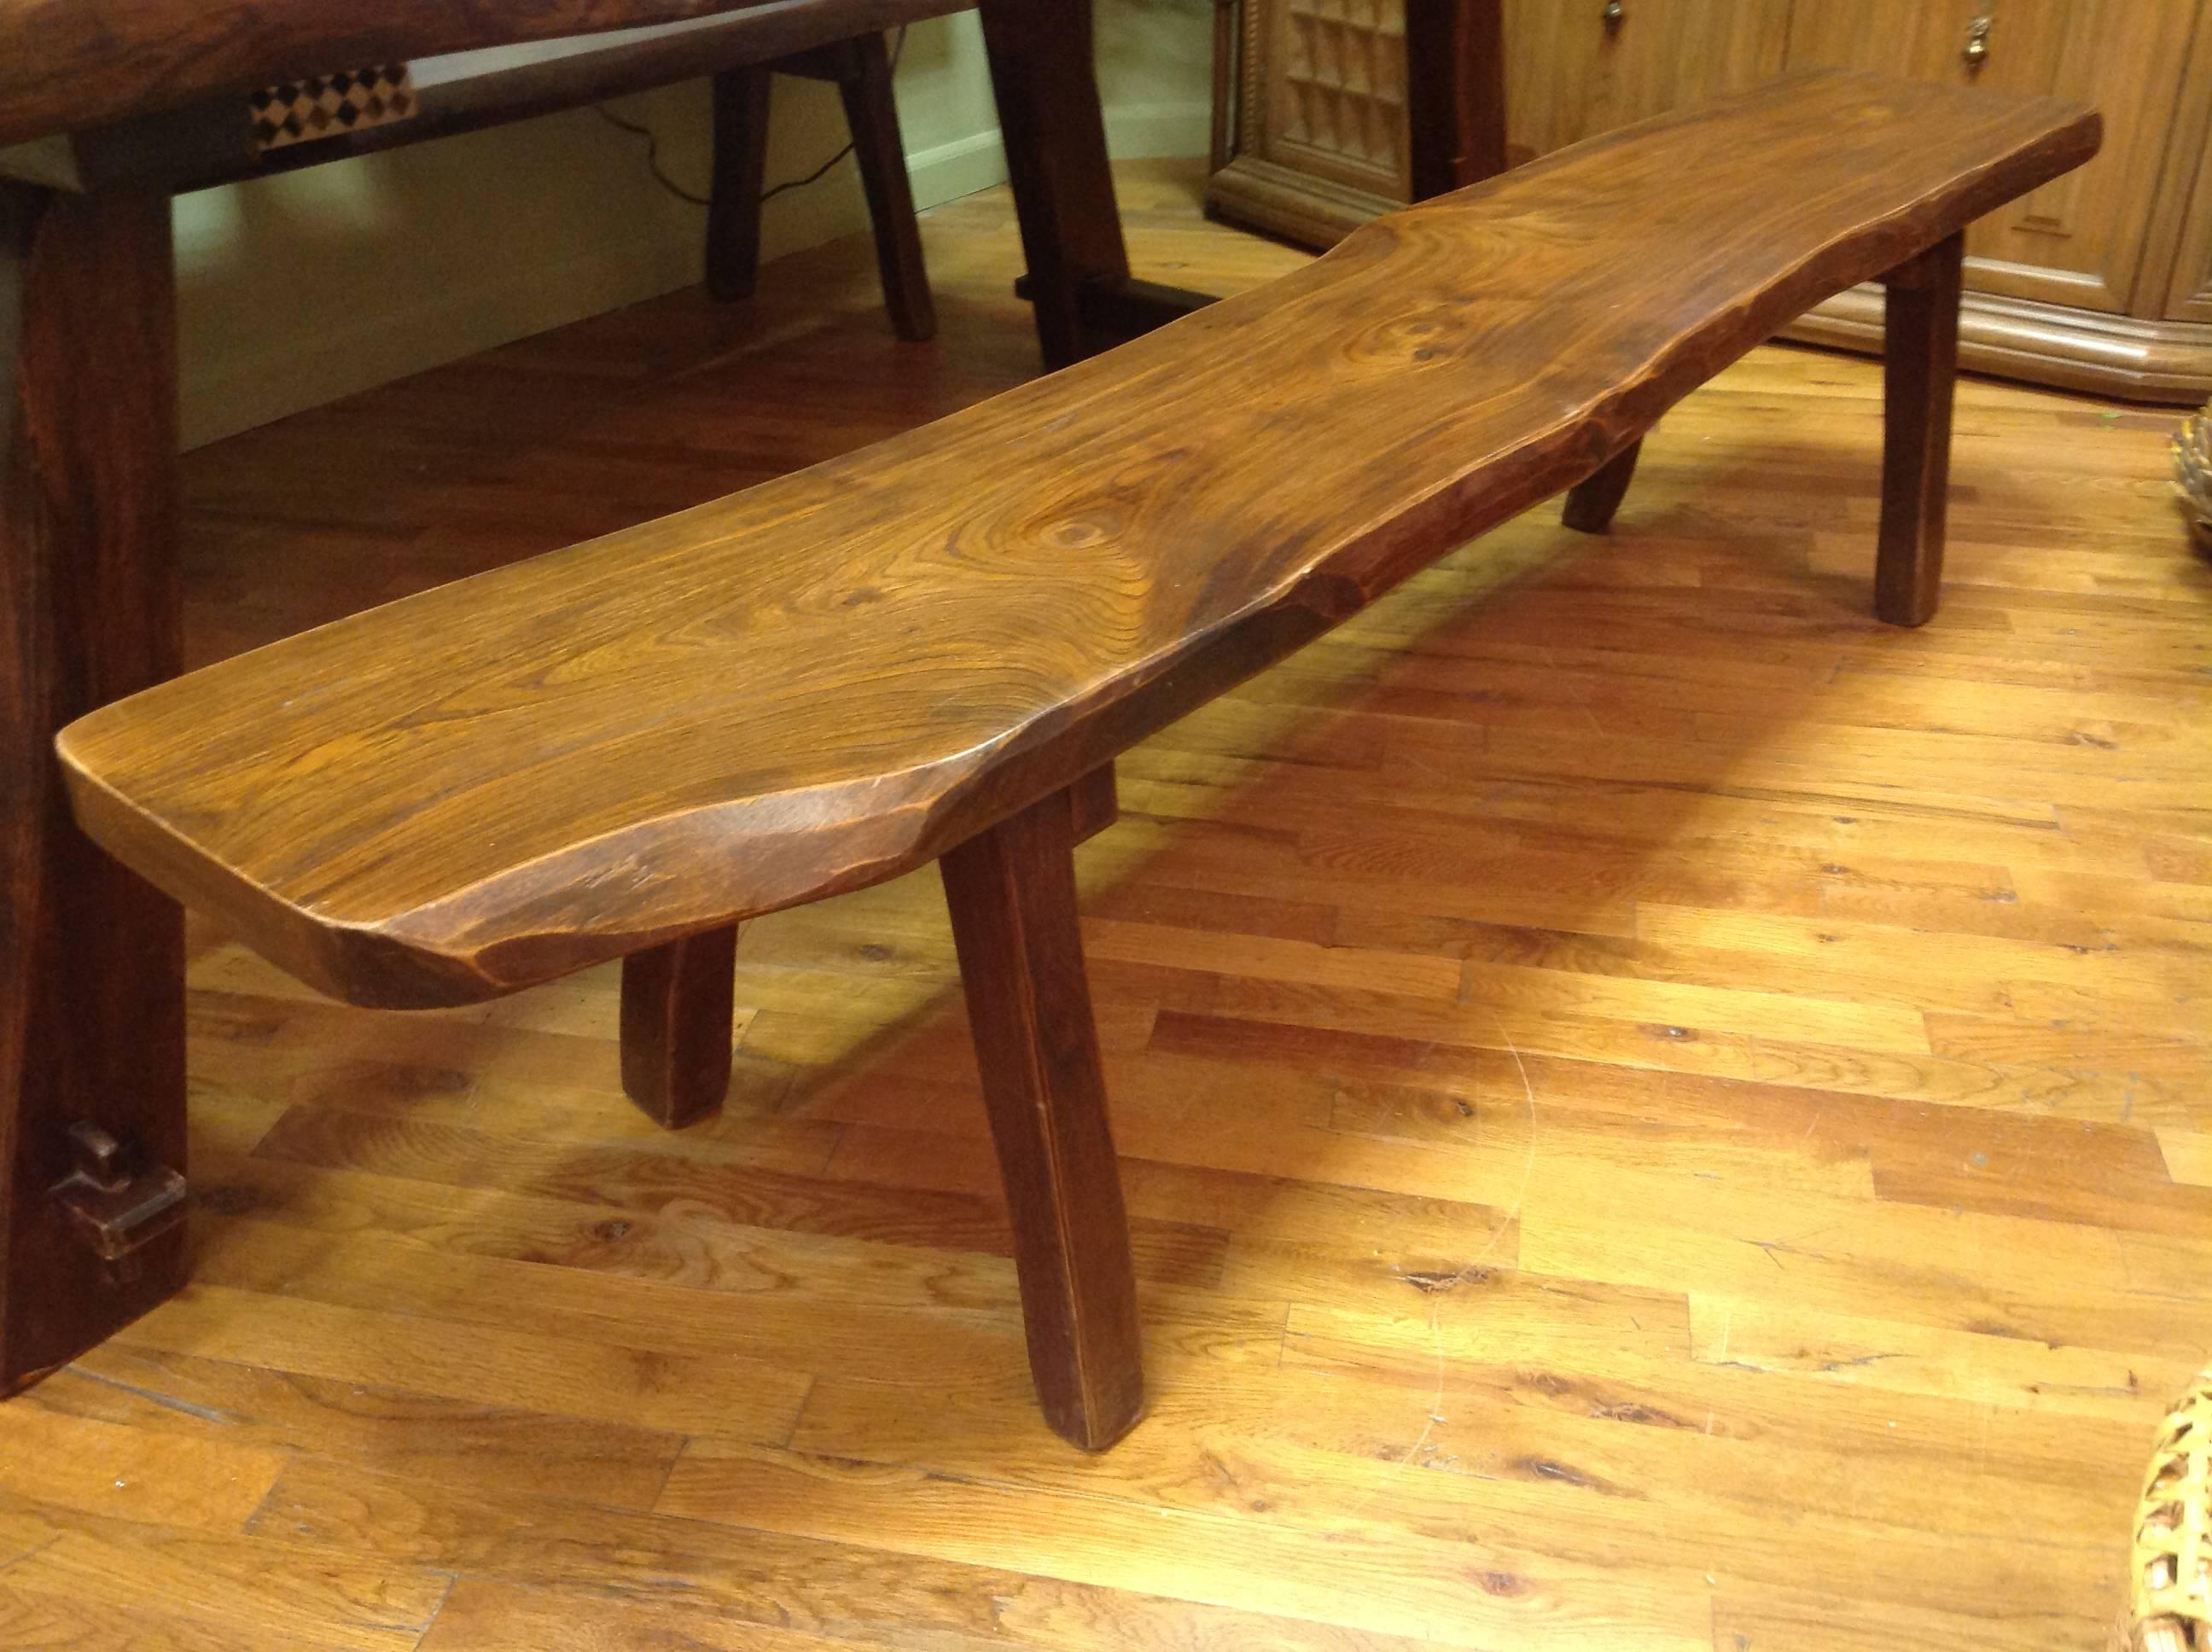 Organic pair of live-edge slab-top benches made in France by a local artisan. Hand-hewn from natural, solid hardwood, these benches work well in both contemporary and traditional interiors or on either side of a farm table. Slabs are 2